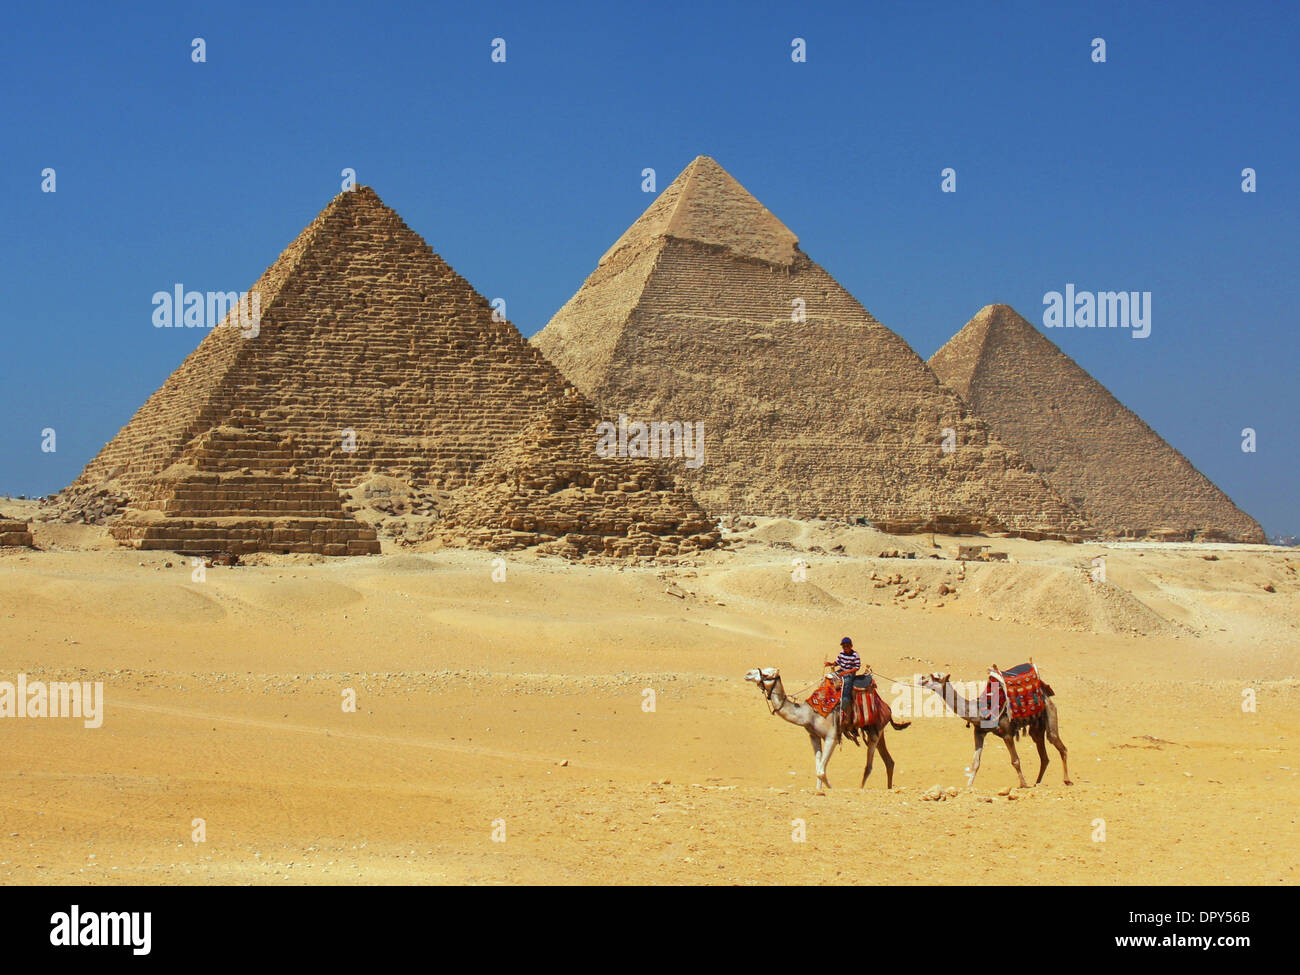 The Pyramids at Giza in Egypt Stock Photo